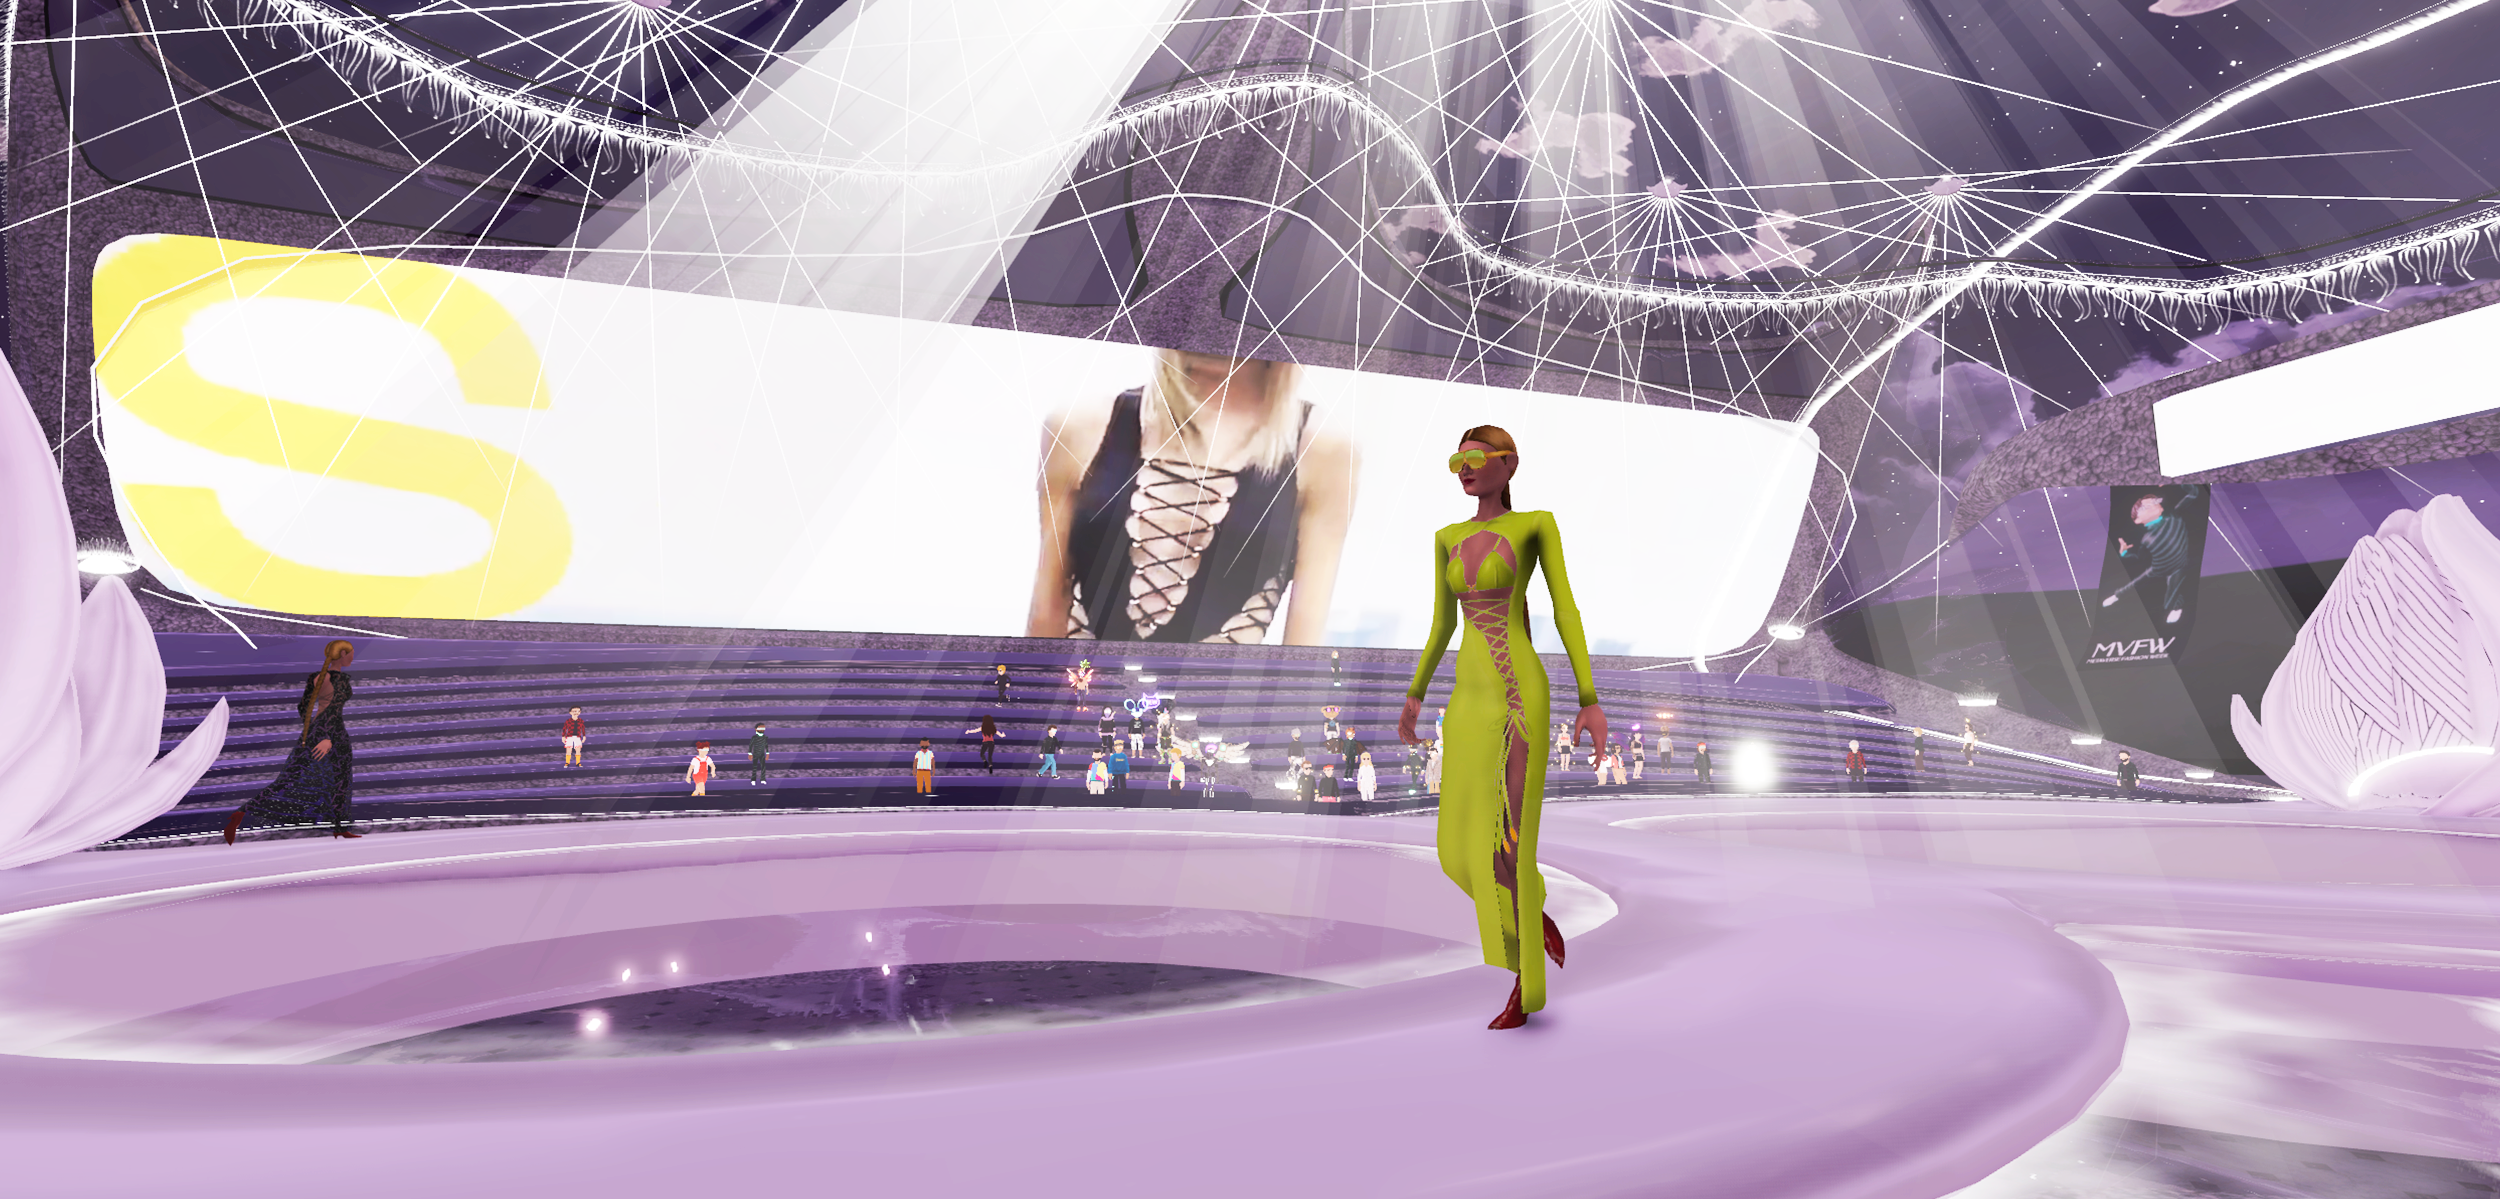 How is Digital Fashion taking over the Metaverse